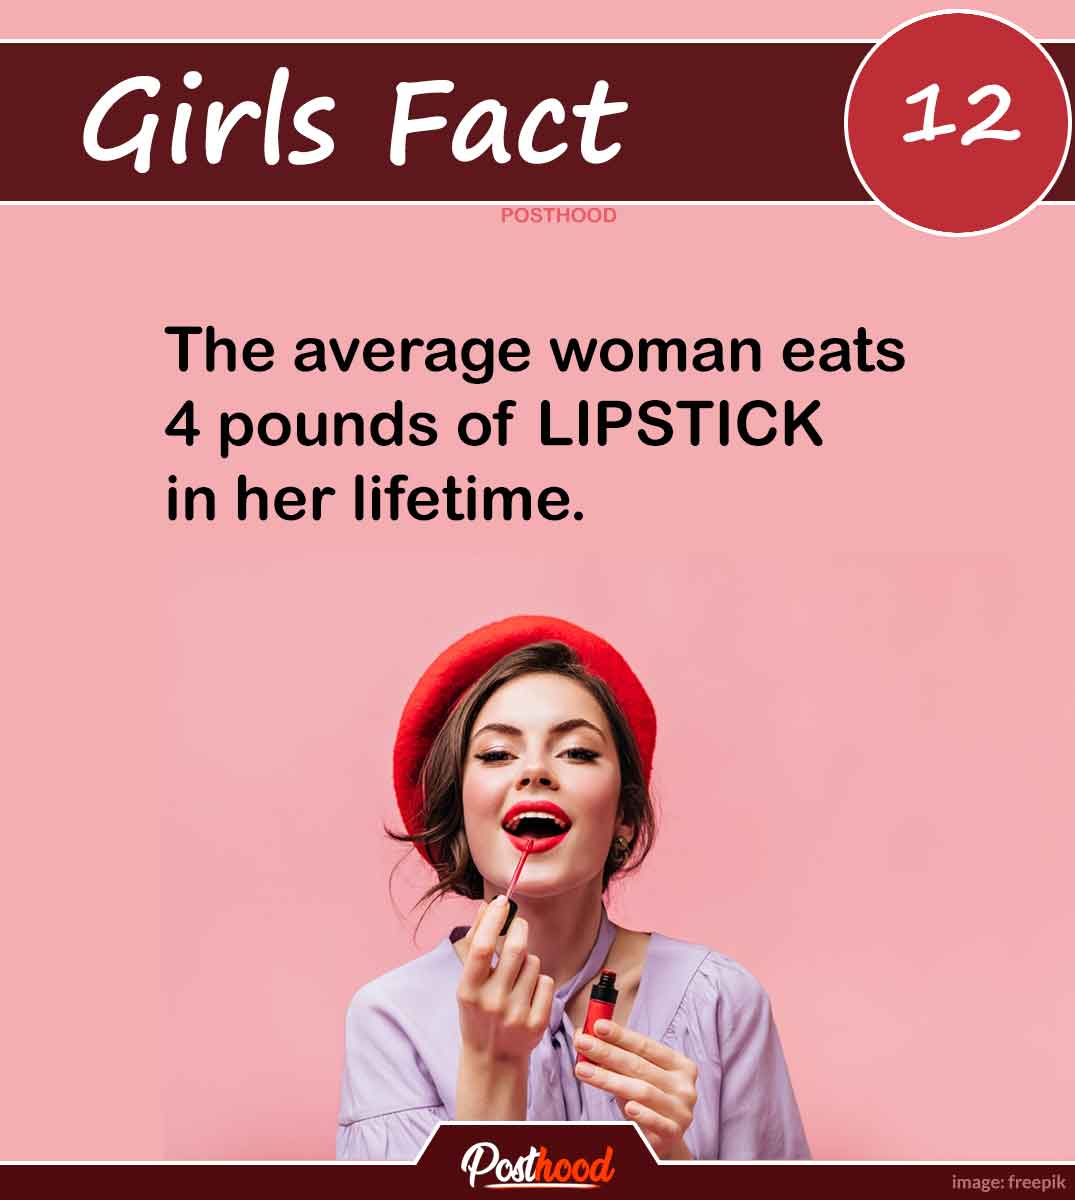 Enjoy fun girls psychology about her body, mind, and behavior. Know some weird girls' facts that will blow your mind and can make you speechless.